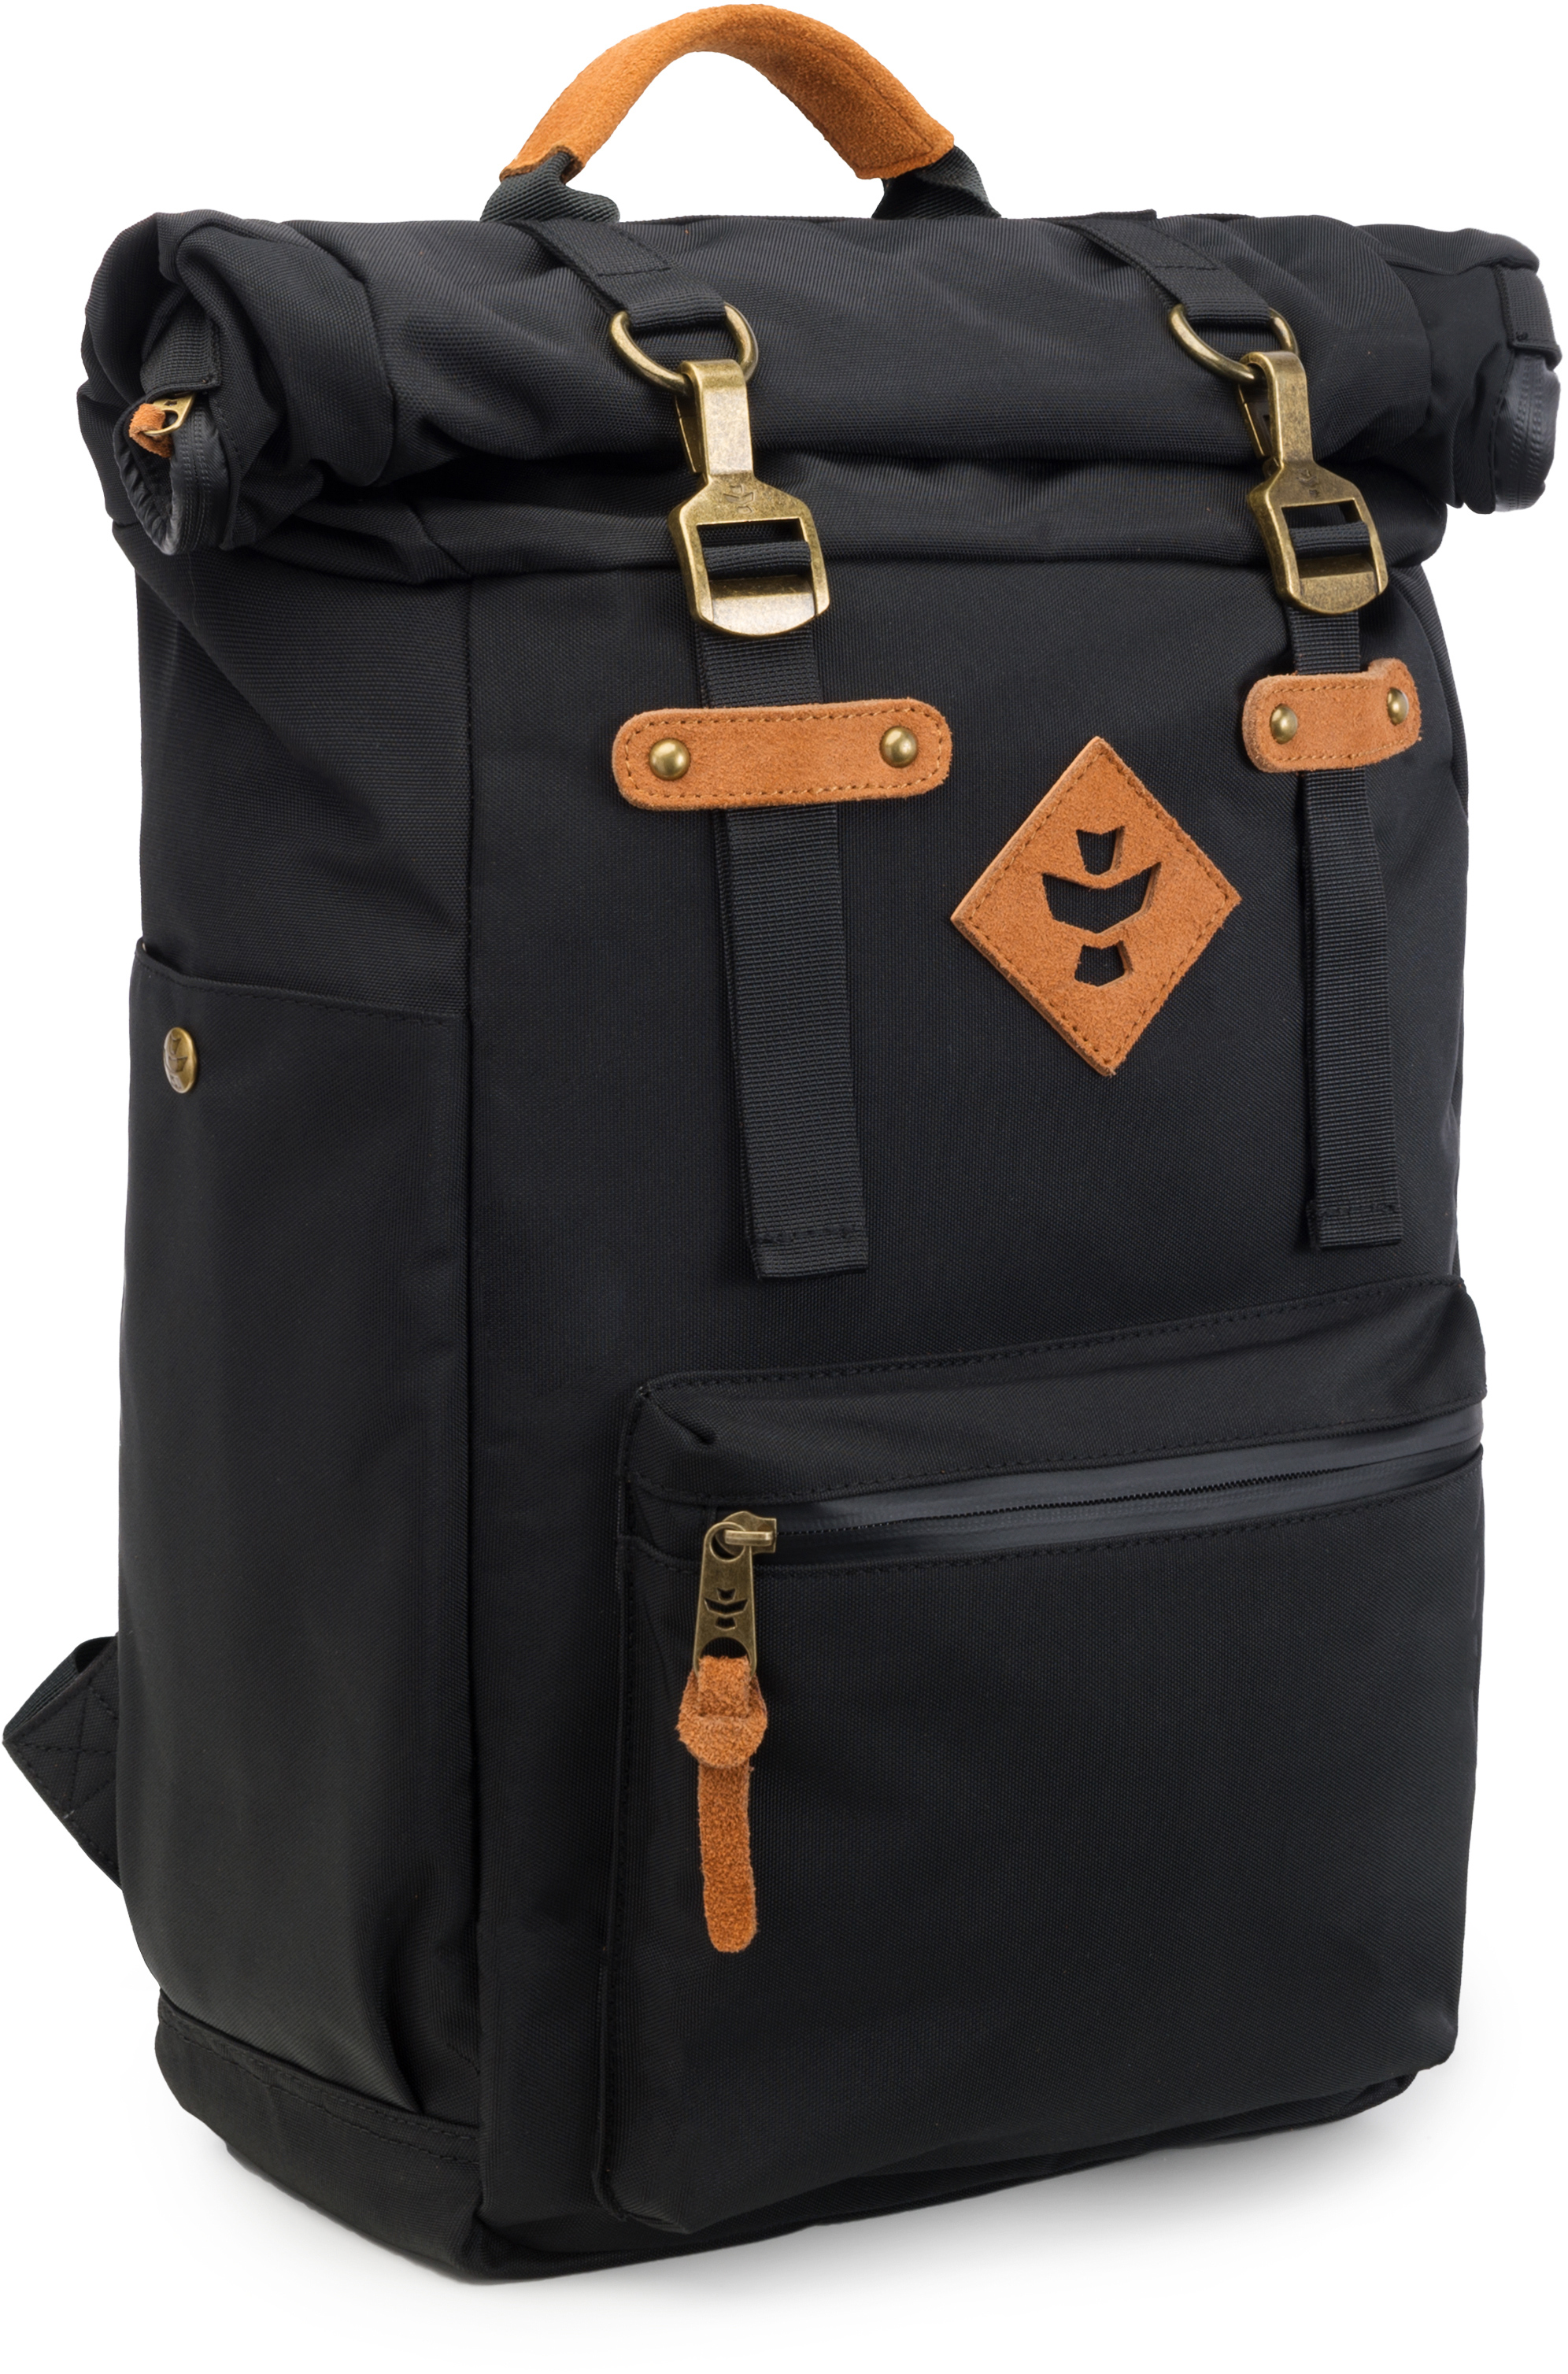 Picture for Revelry Supply The Drifter Rolltop Backpack, Black